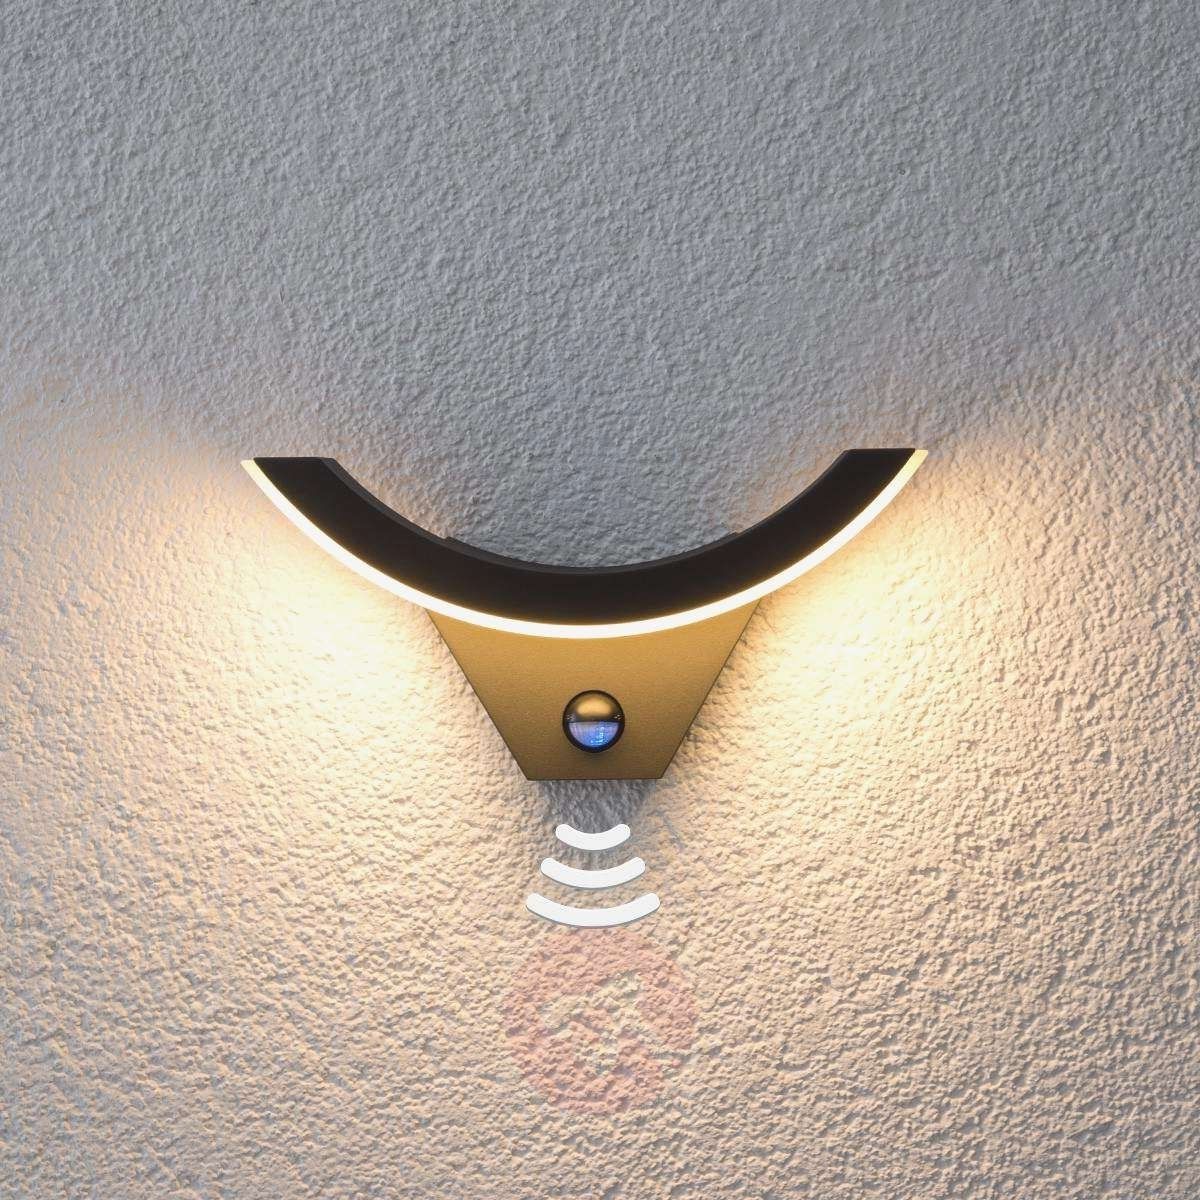 2019 Wonderful Outside Wall Lights Led Picture (View 18 of 20)